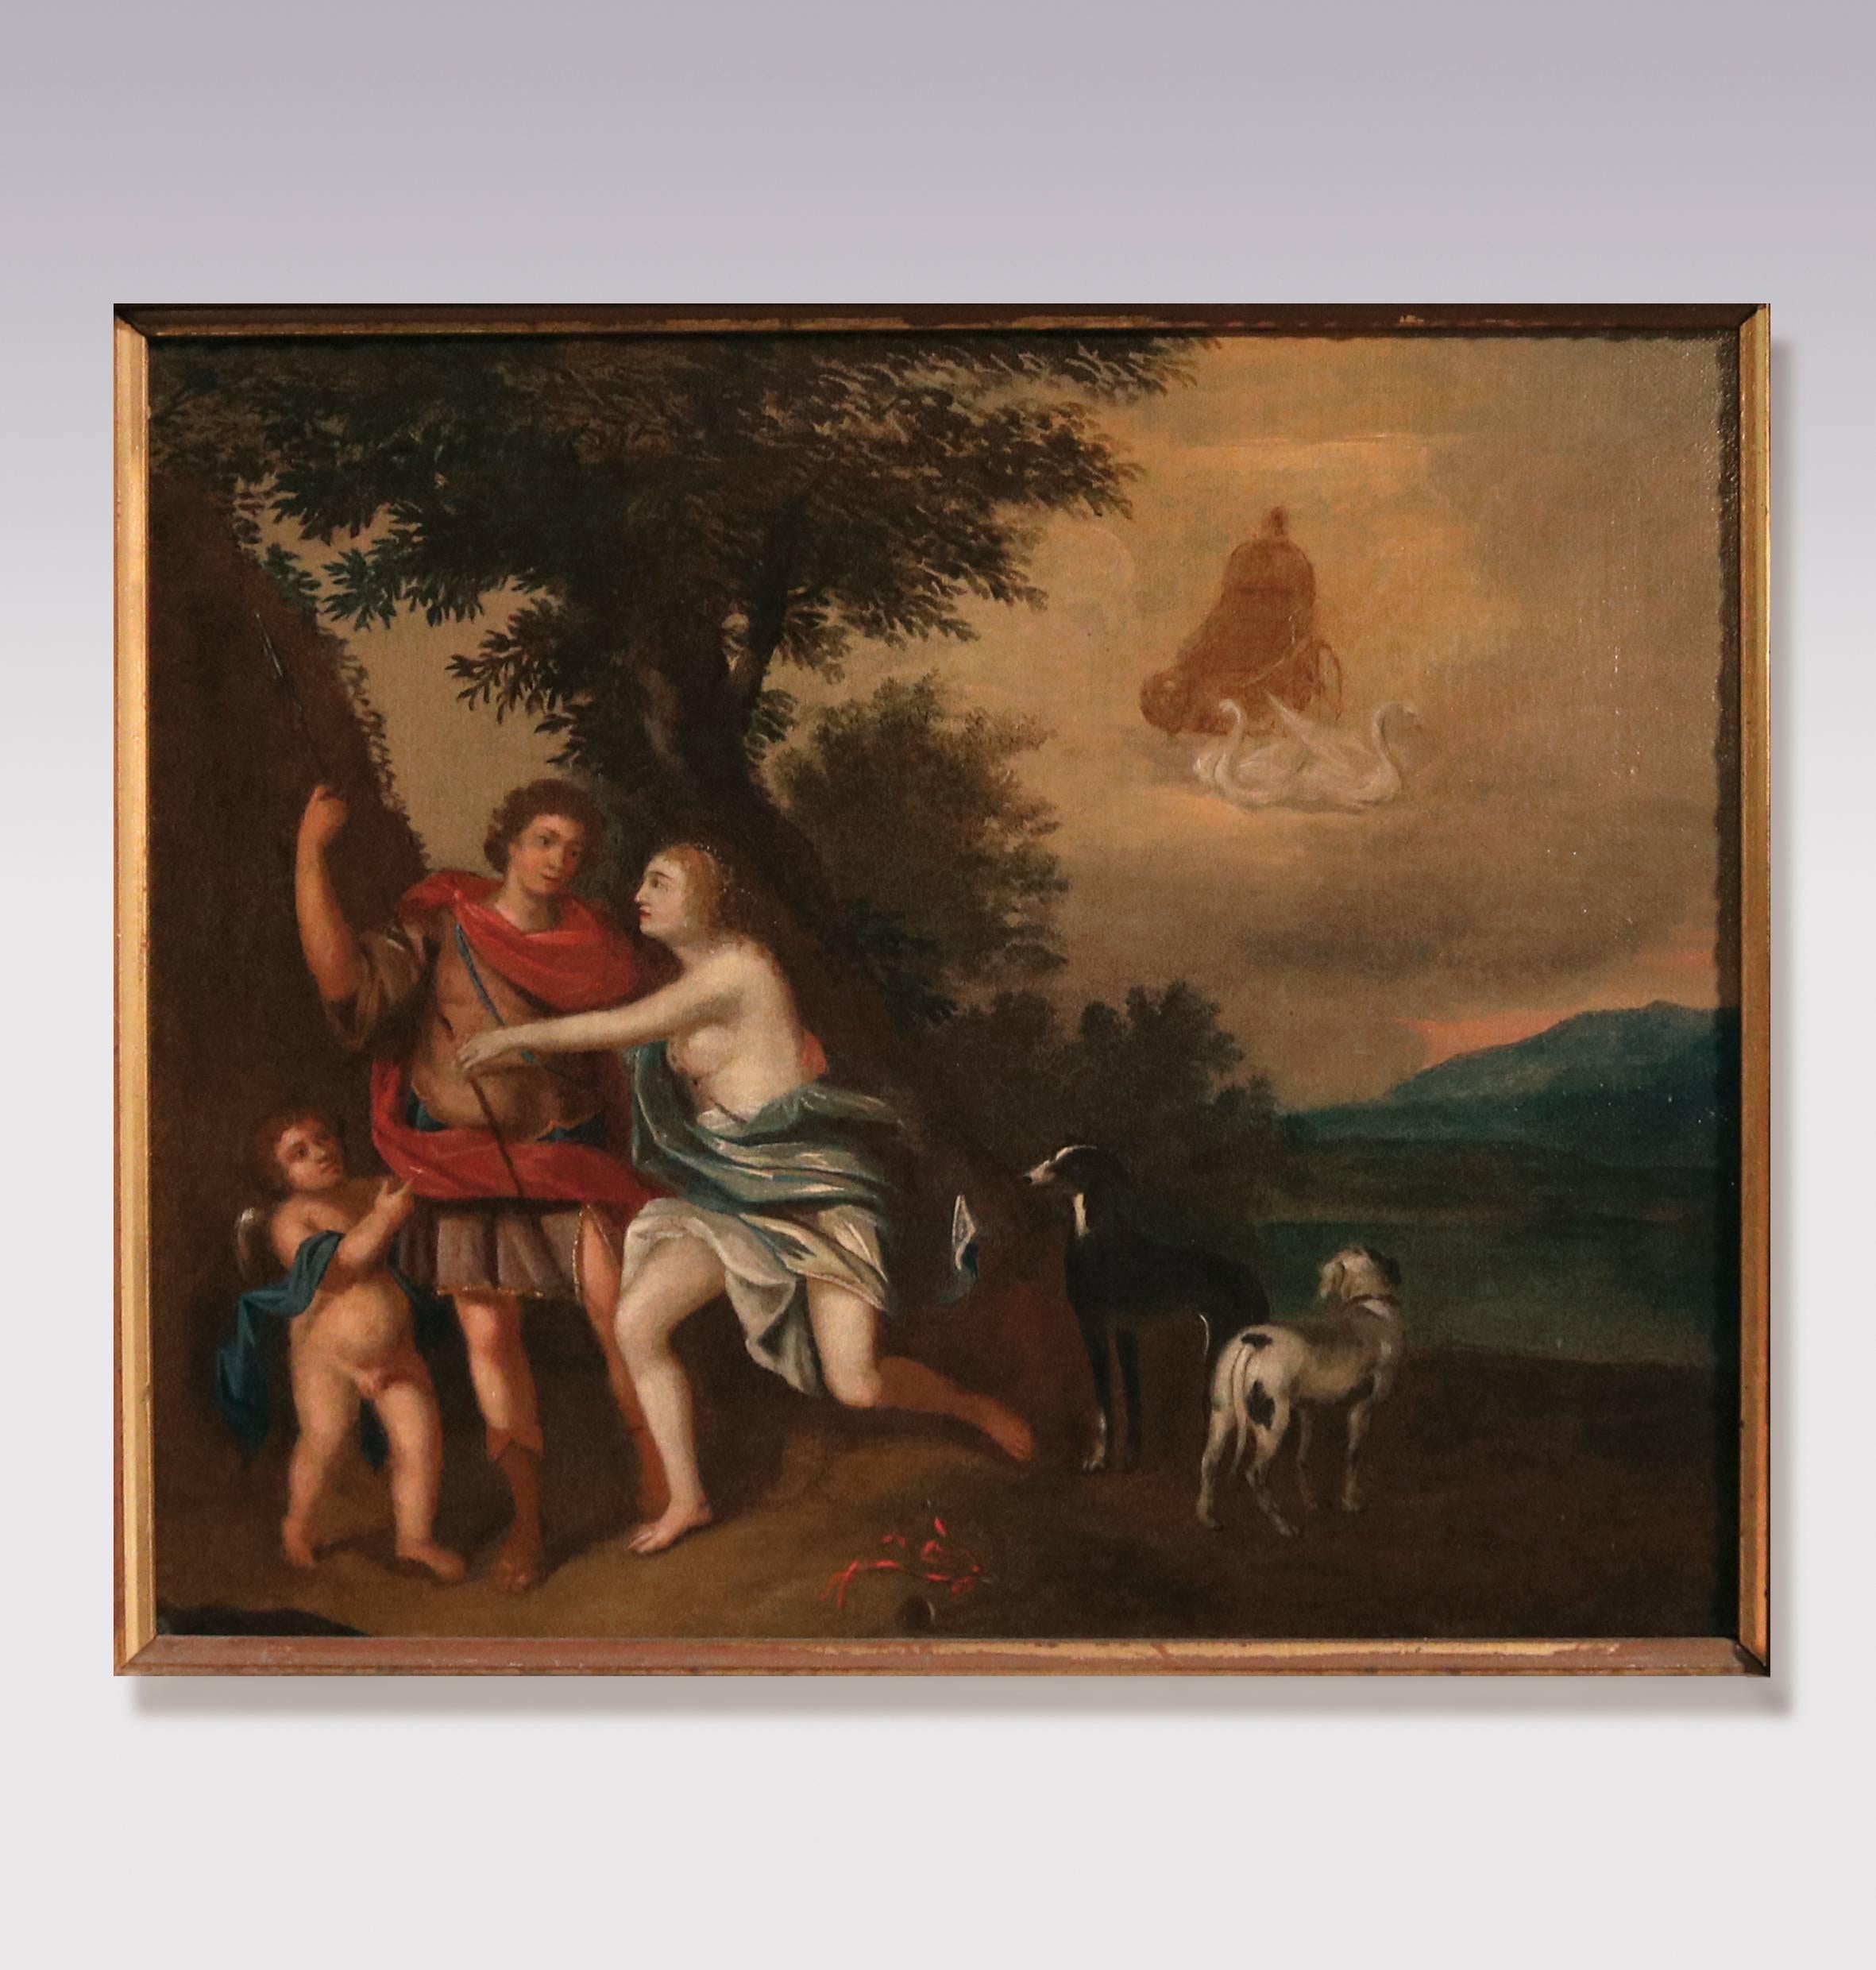 An early 18th century oil painting from the school of Jan van Neck (1635-1714), Amsterdam, depiction mythological subjects, probably Venus, Cupid and Mars with dogs watched by Apollo.